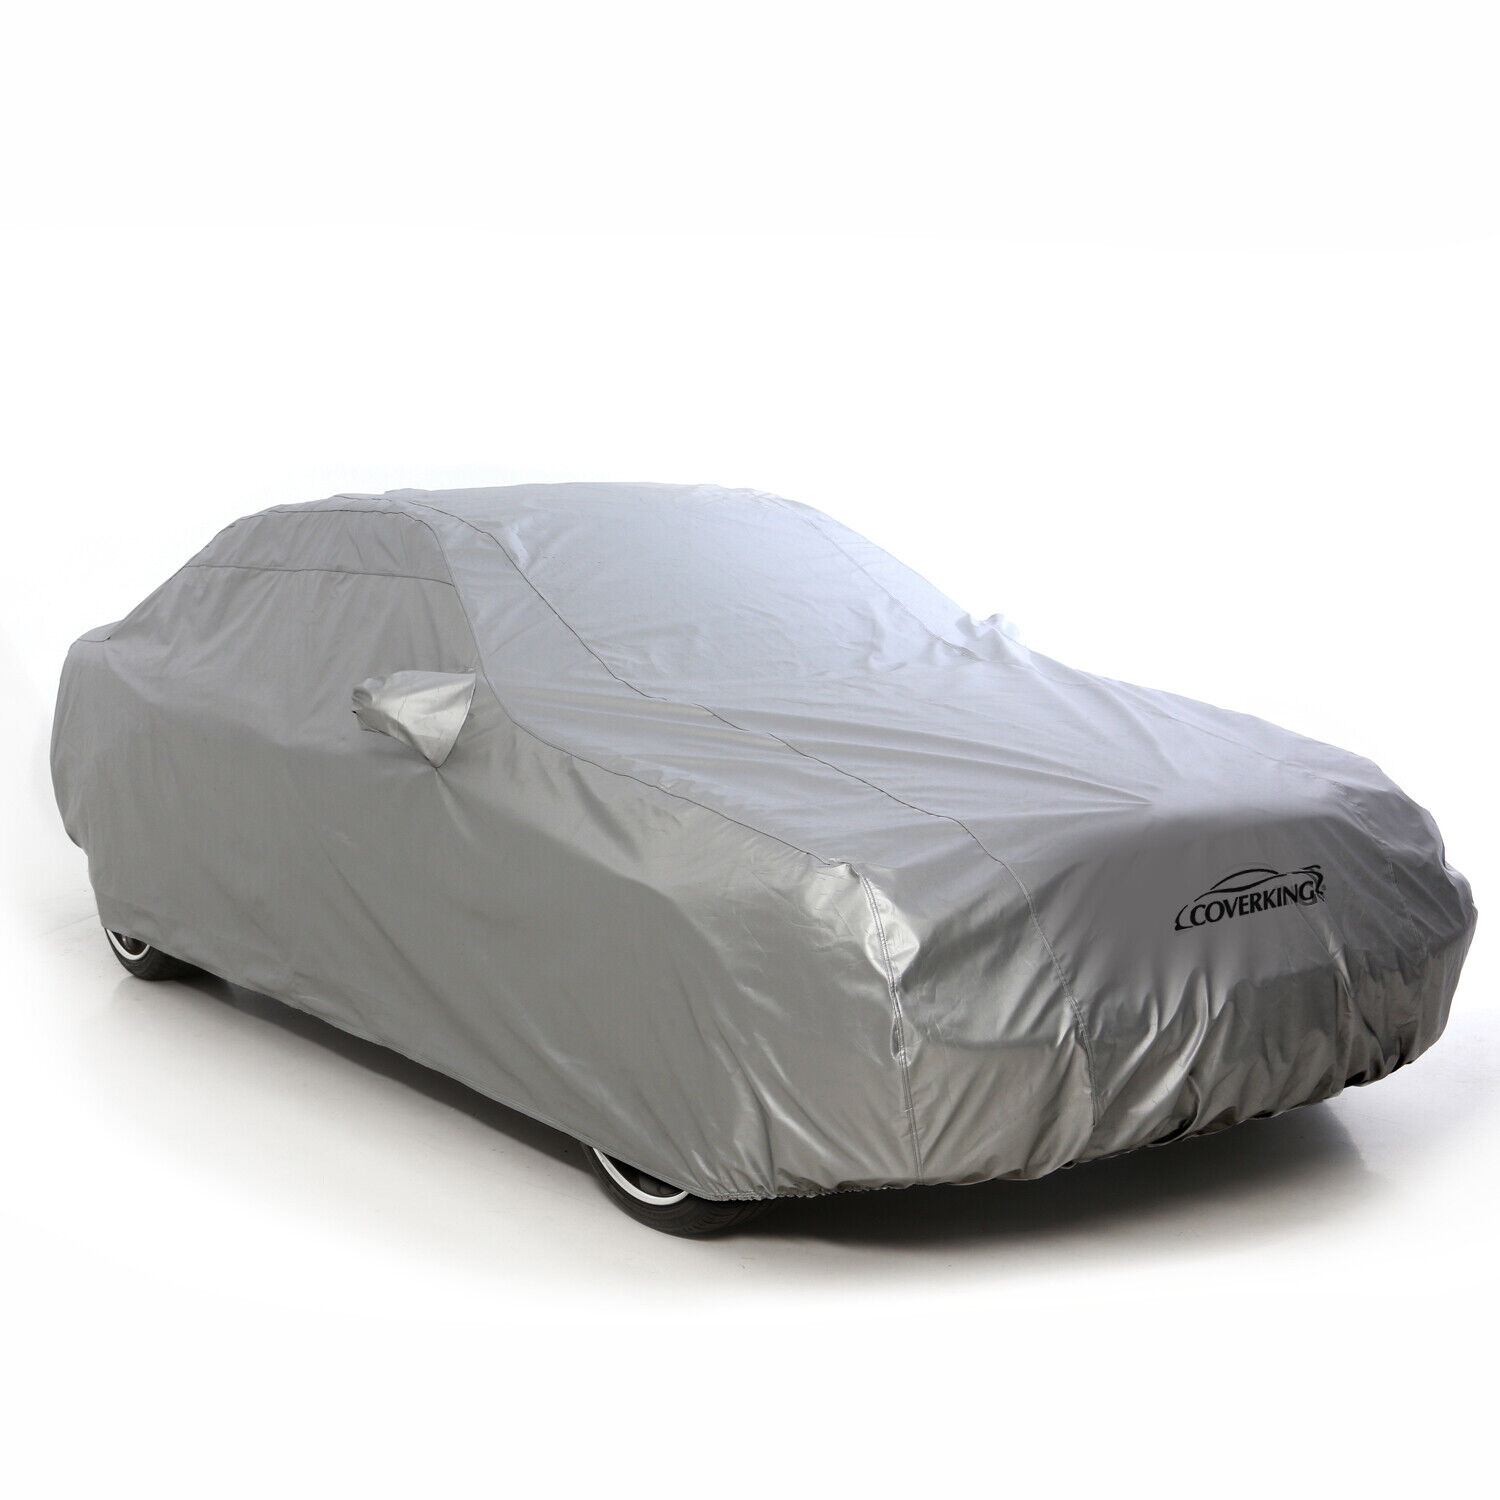 Coverking Silverguard Custom Tailored Car Cover for MG MGA - Made to Order